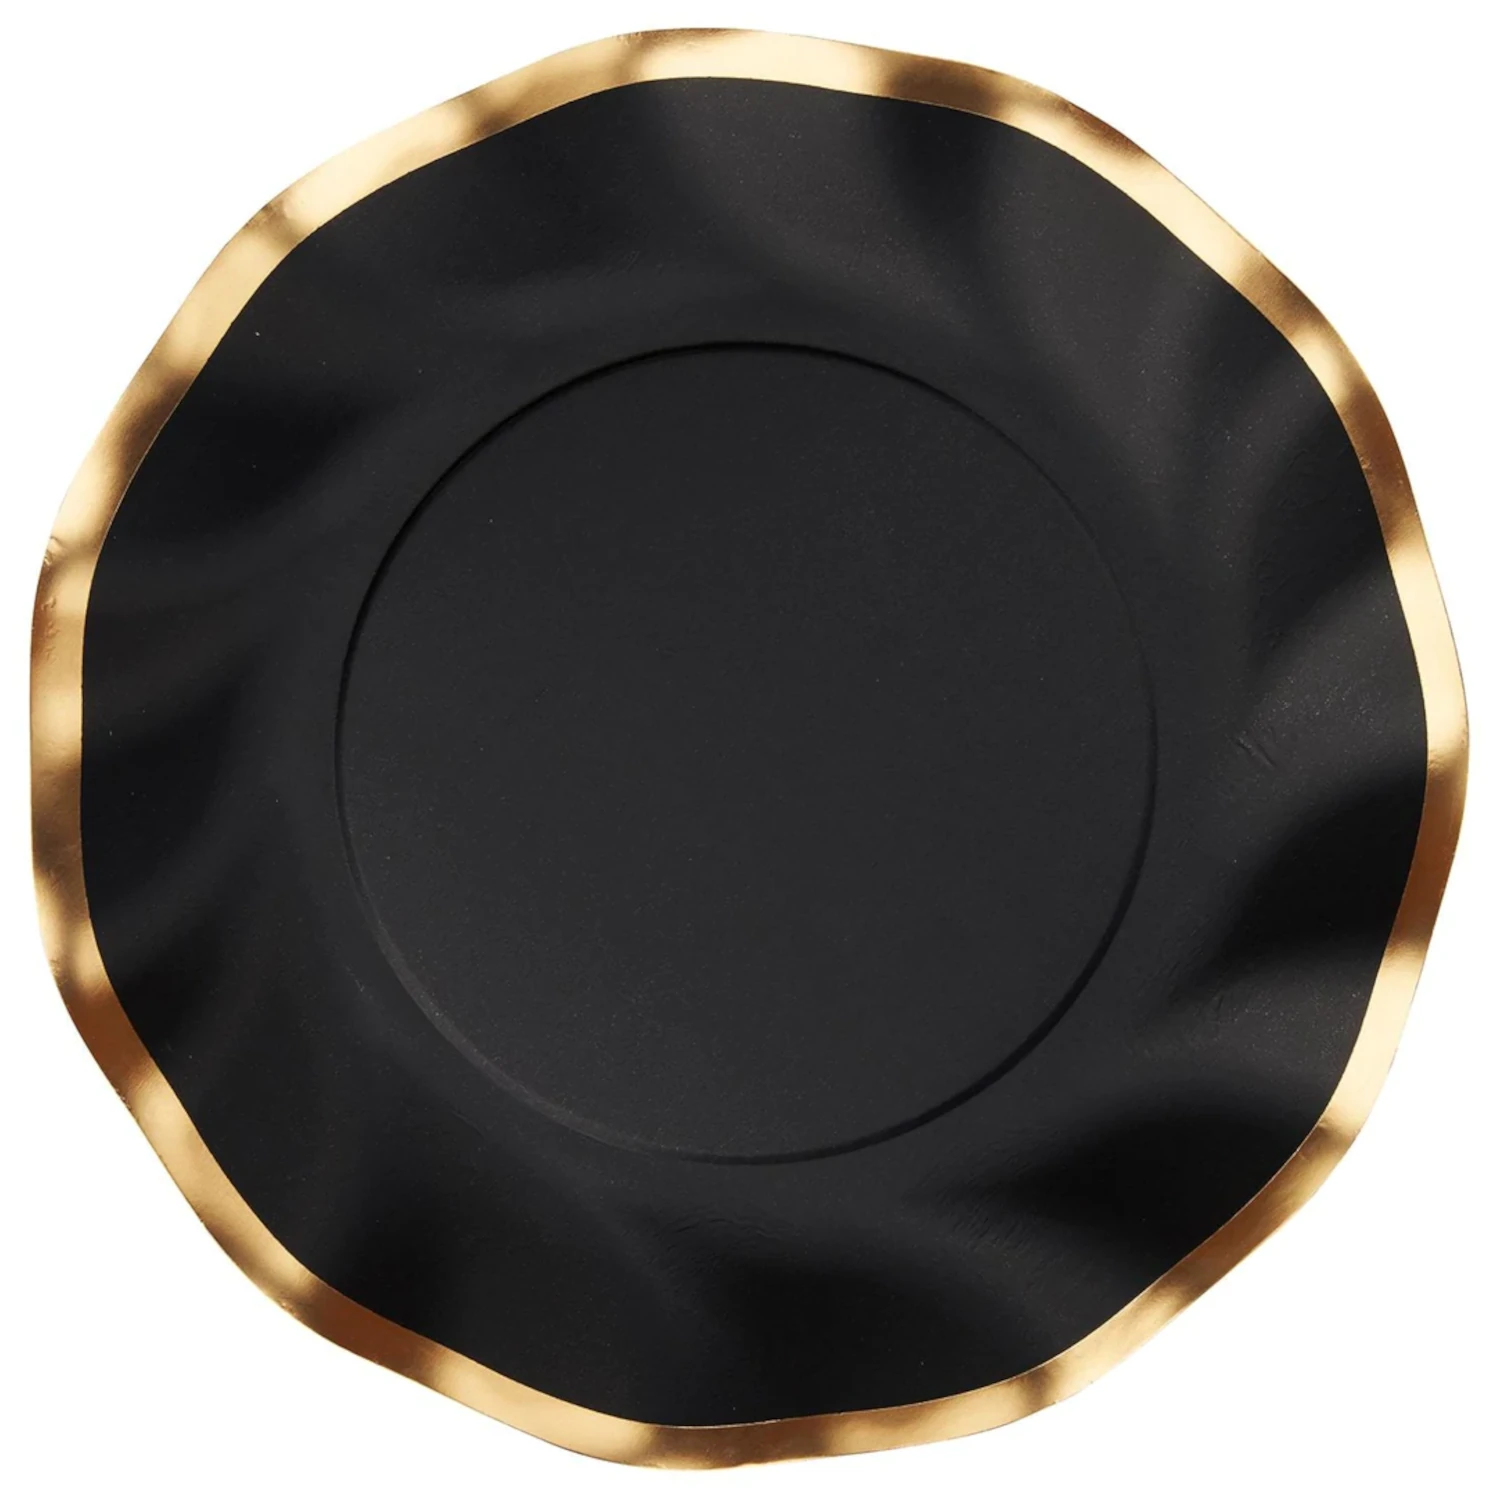 Black Wavy Paper Plates with gold trim and ruffled edge by Sophistiplate.